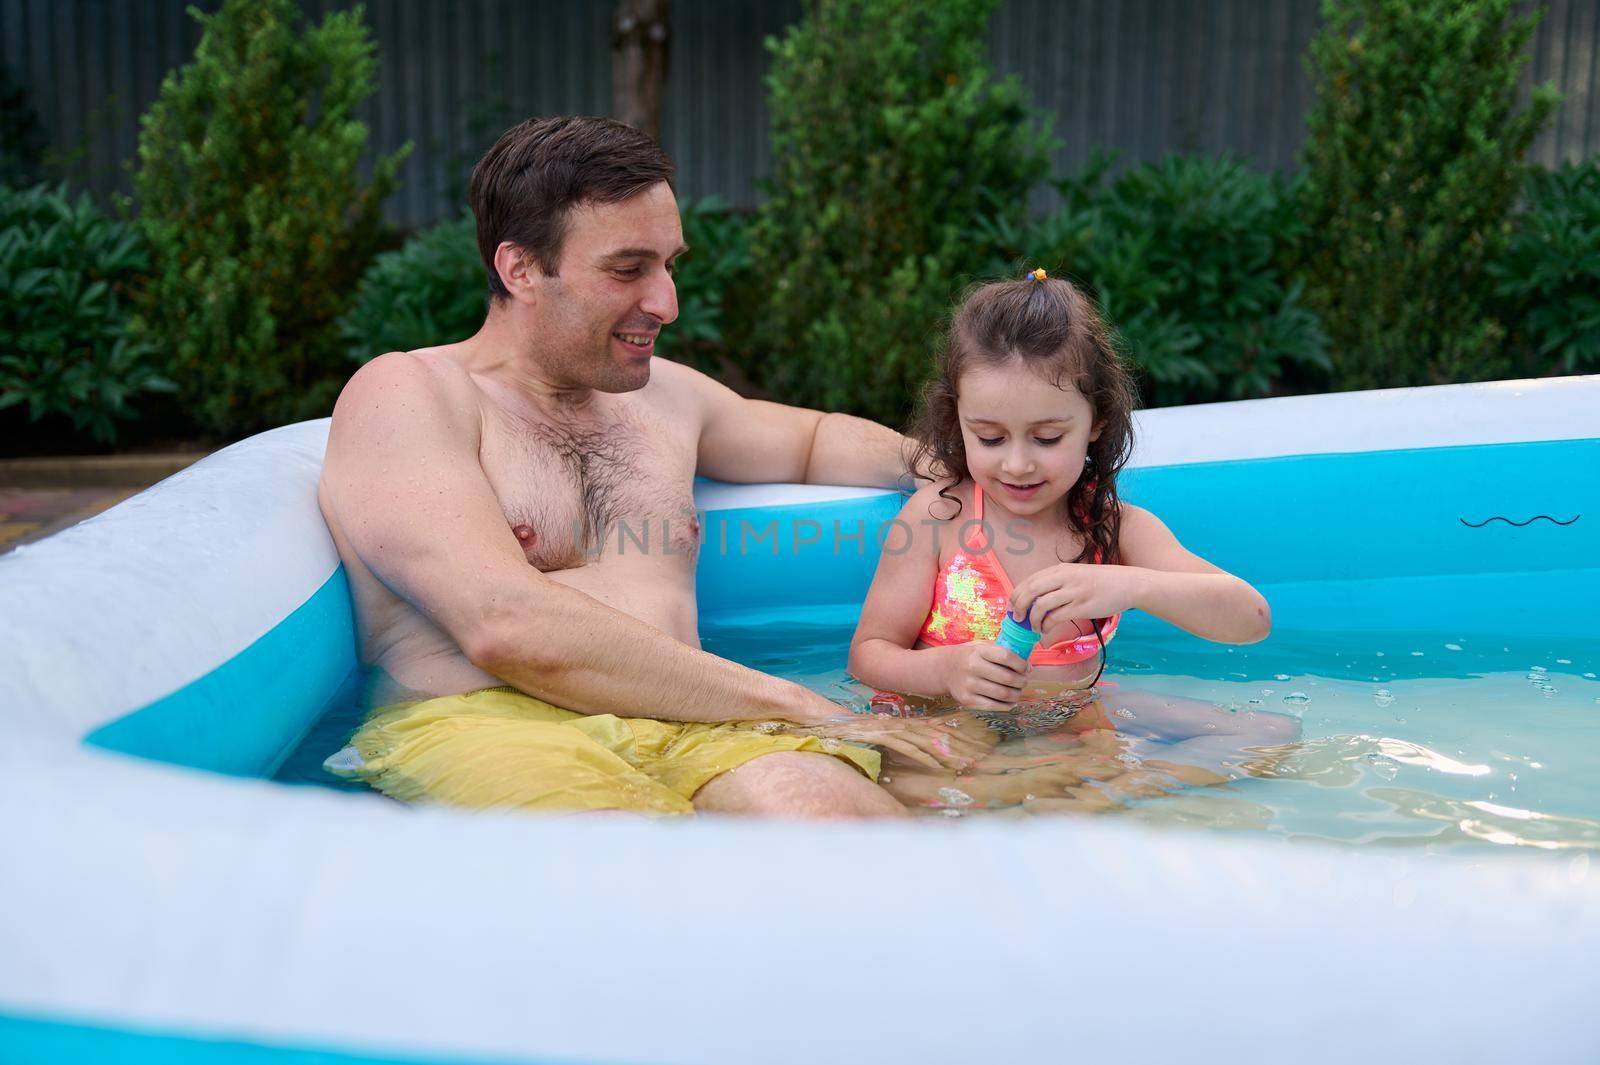 Pleasant middle-aged Caucasian man, loving father with his cute daughter, a charming little girl blowing soap bubbles while having fun in the inflatable water pool at home garden on a sunny summer day